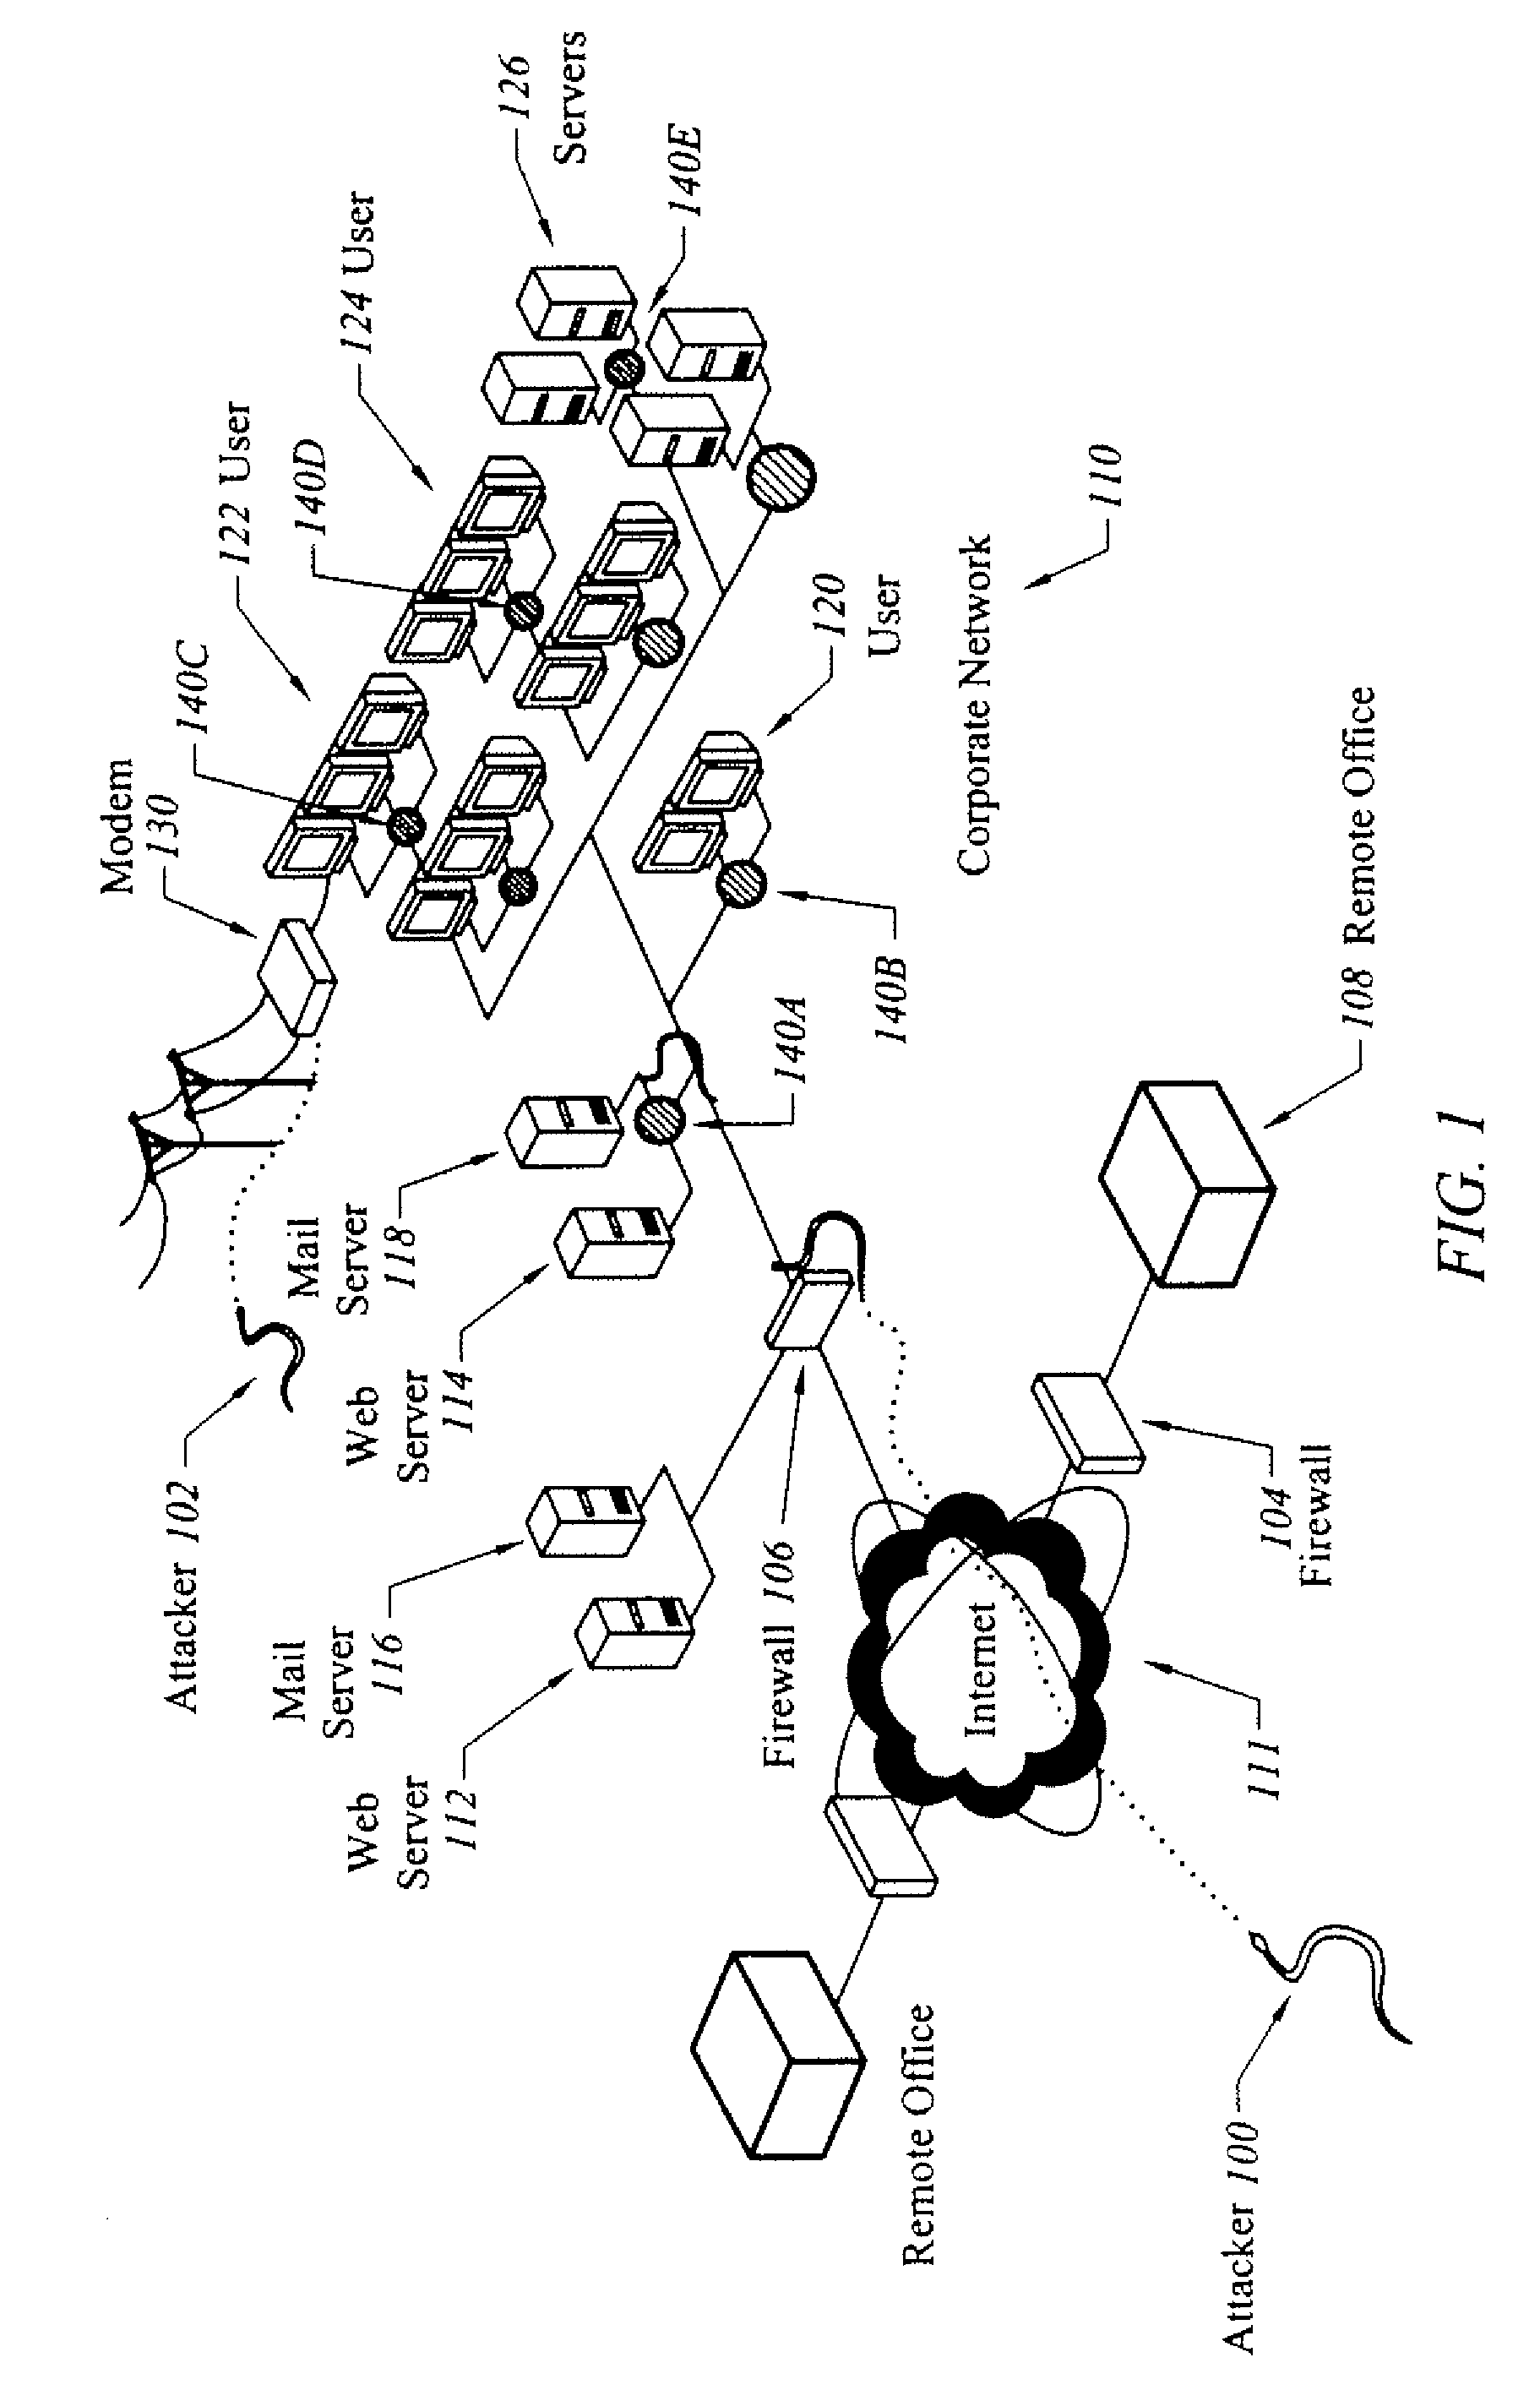 Apparatus and method for biased and weighted sampling of network traffic to facilitate network monitoring